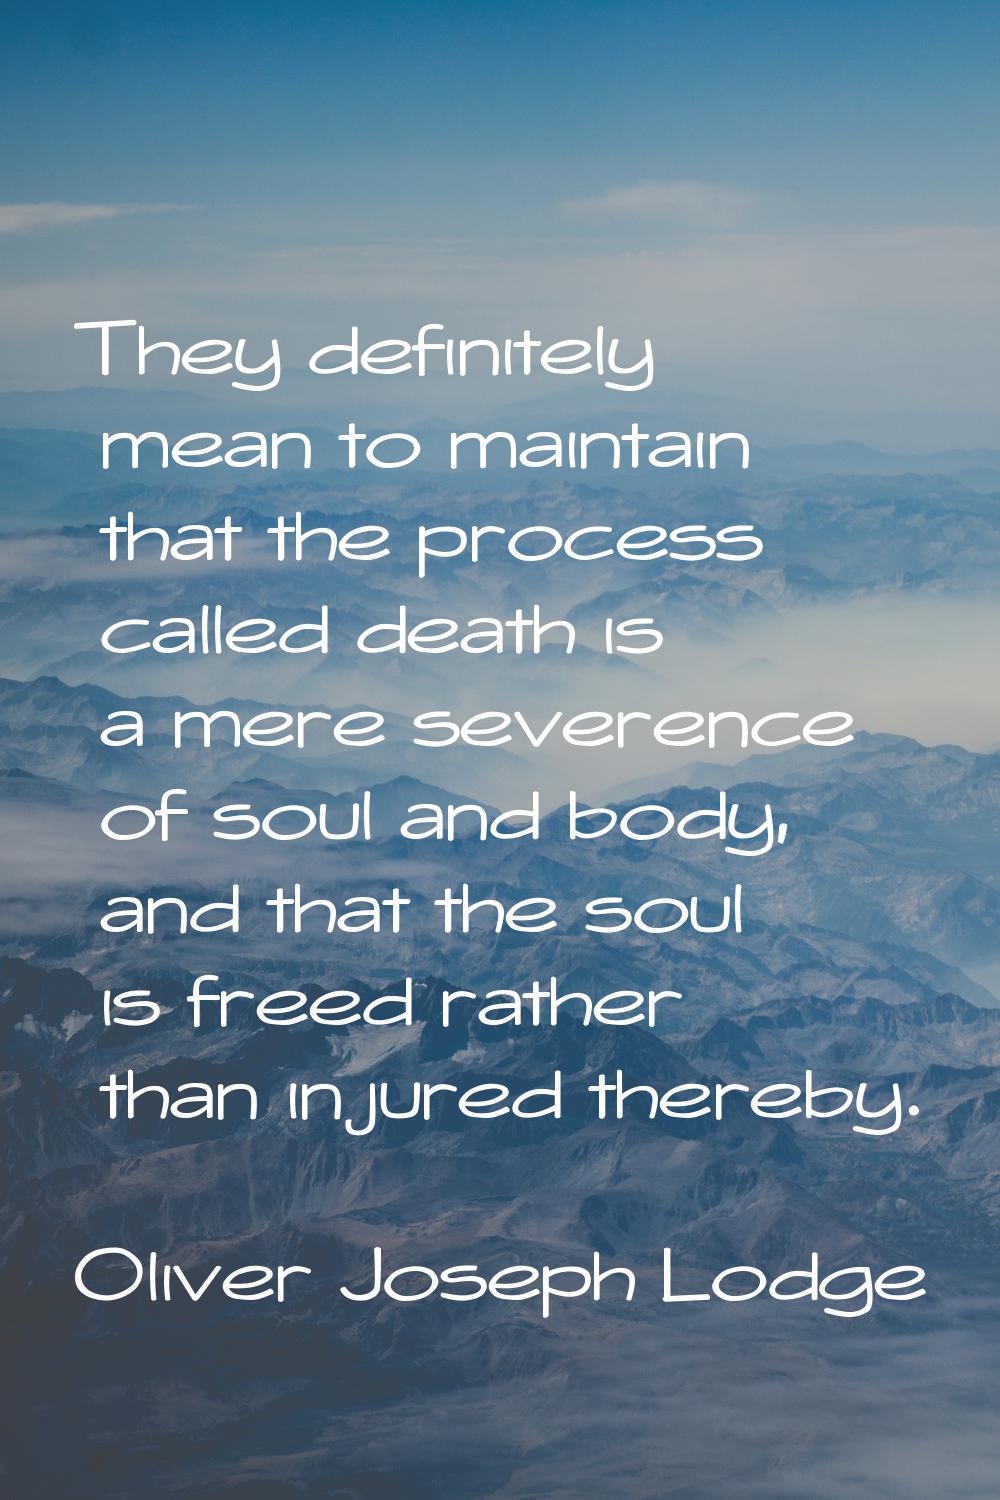 They definitely mean to maintain that the process called death is a mere severence of soul and body